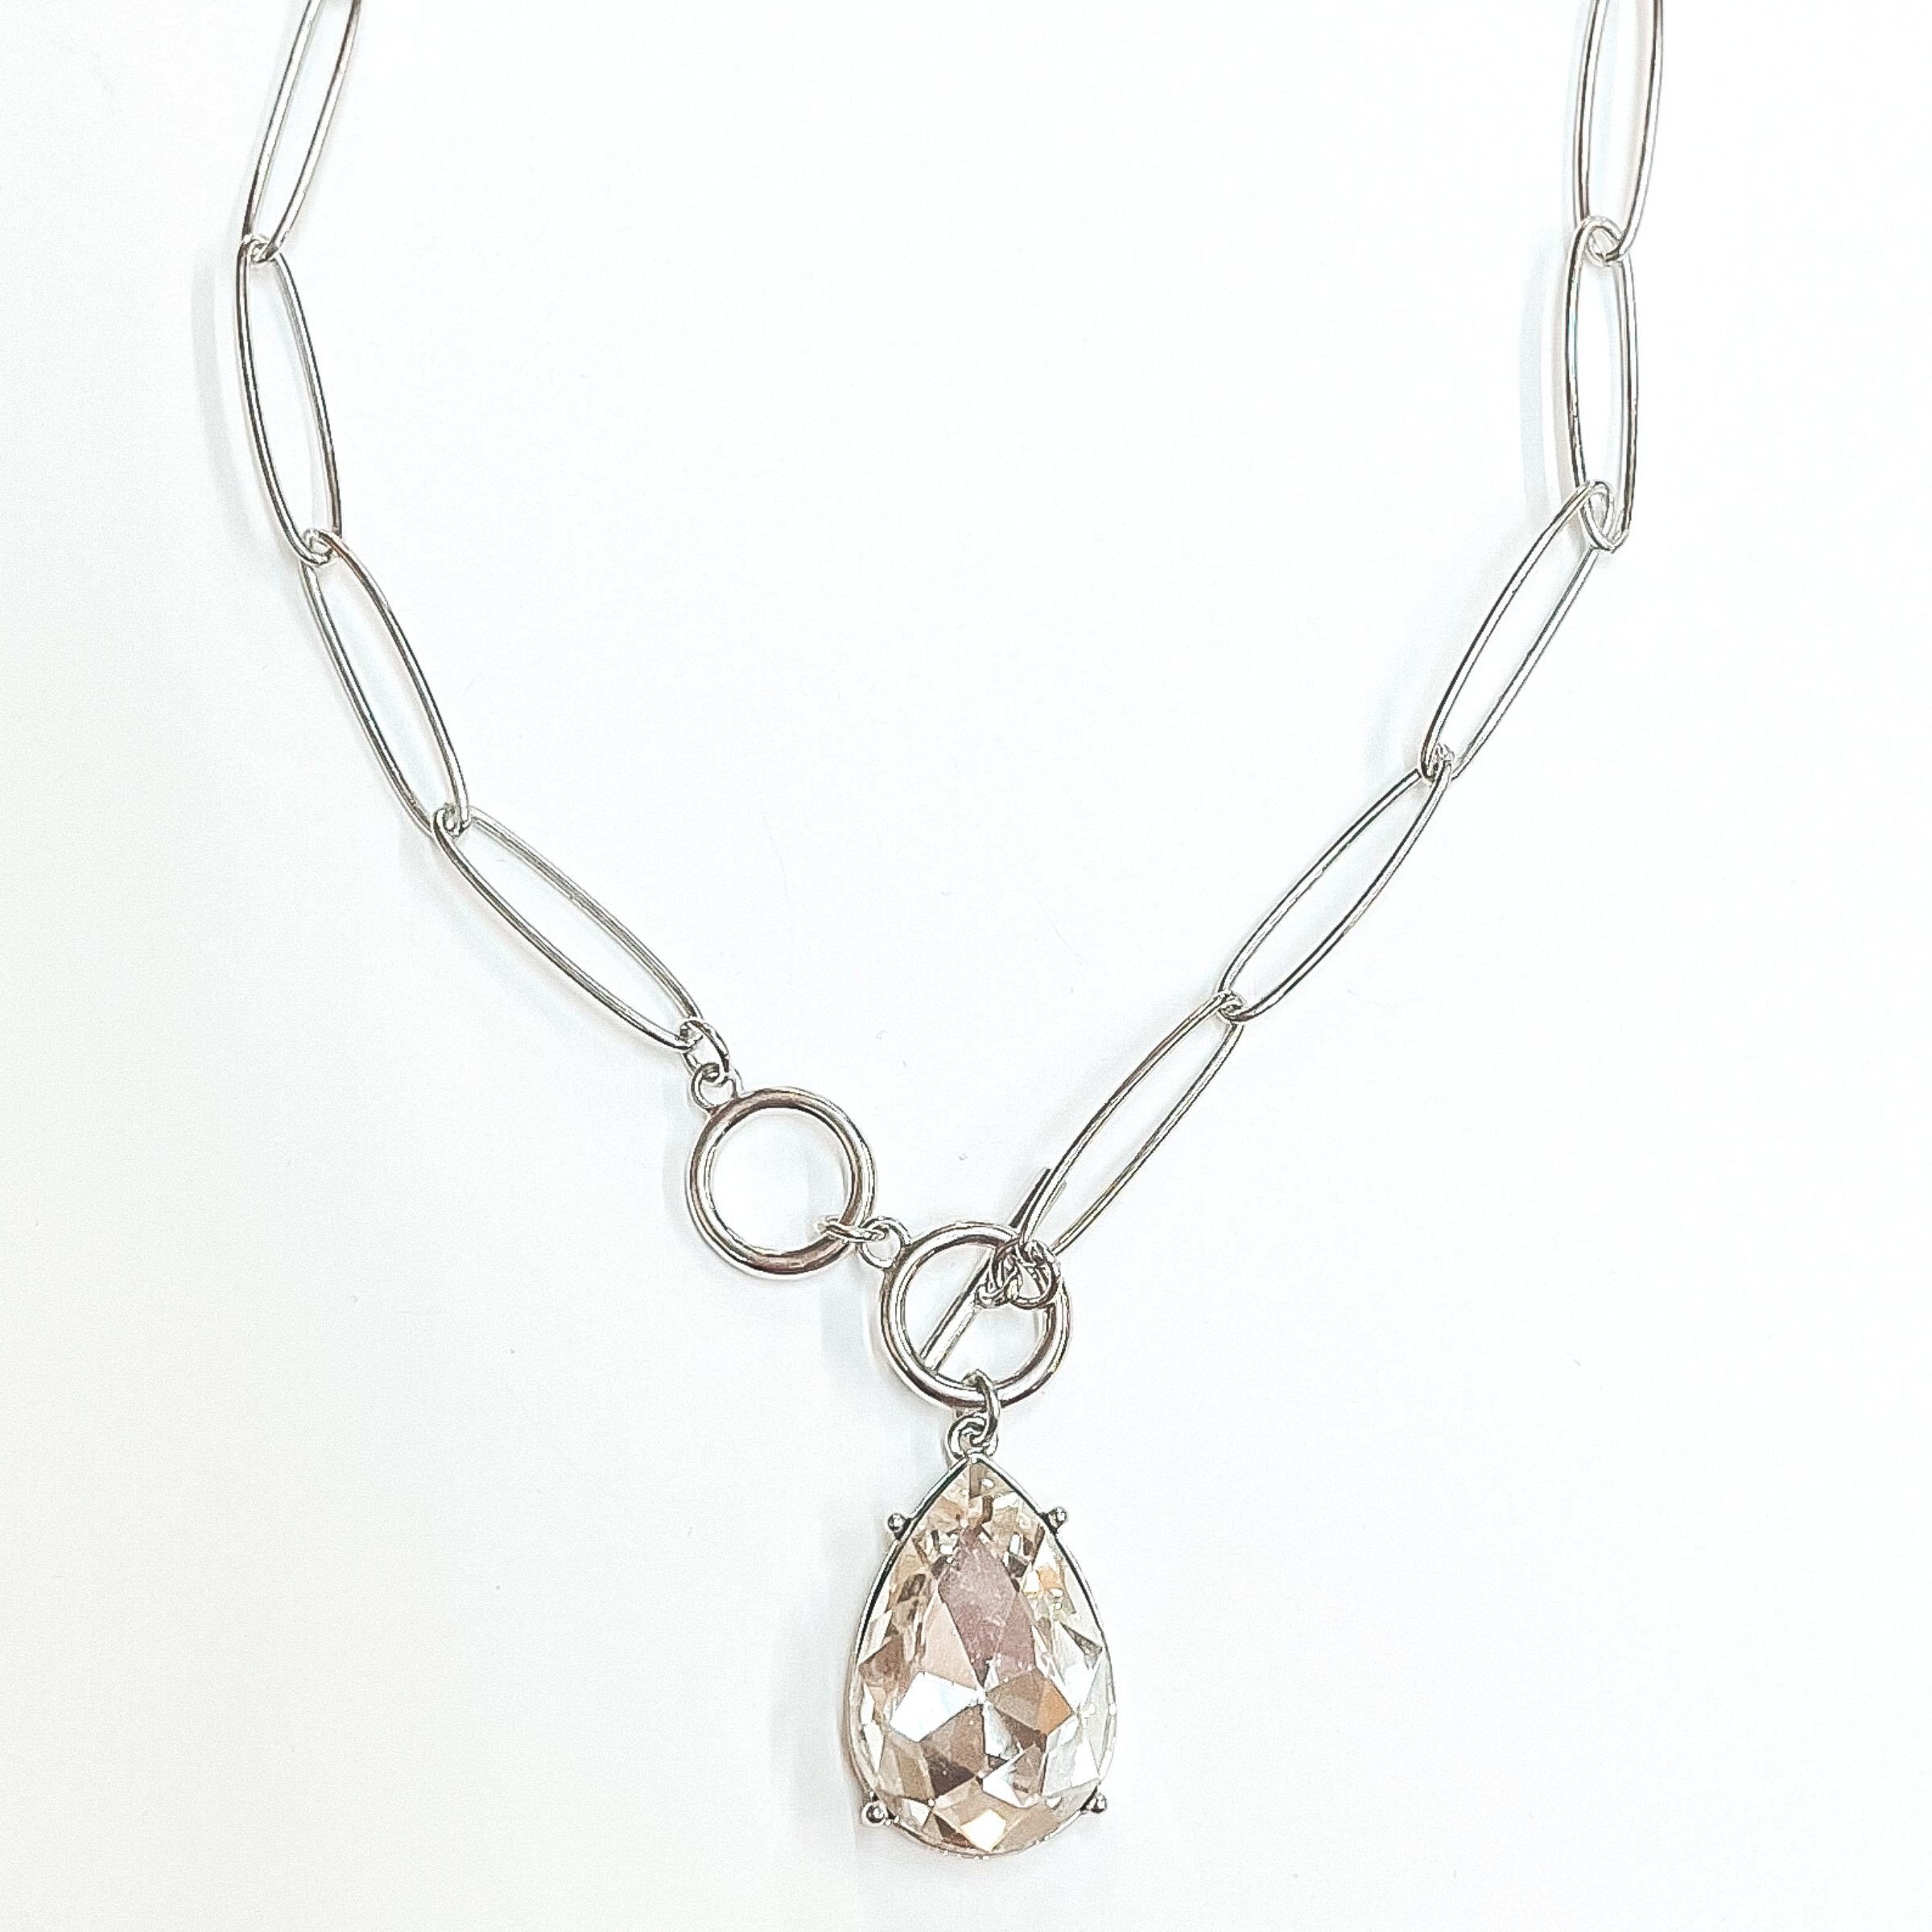 Silver, thin chain necklace with front toggle clasp. This necklace includes a clear teardrop crystal. This necklace is pictured on a white background. 